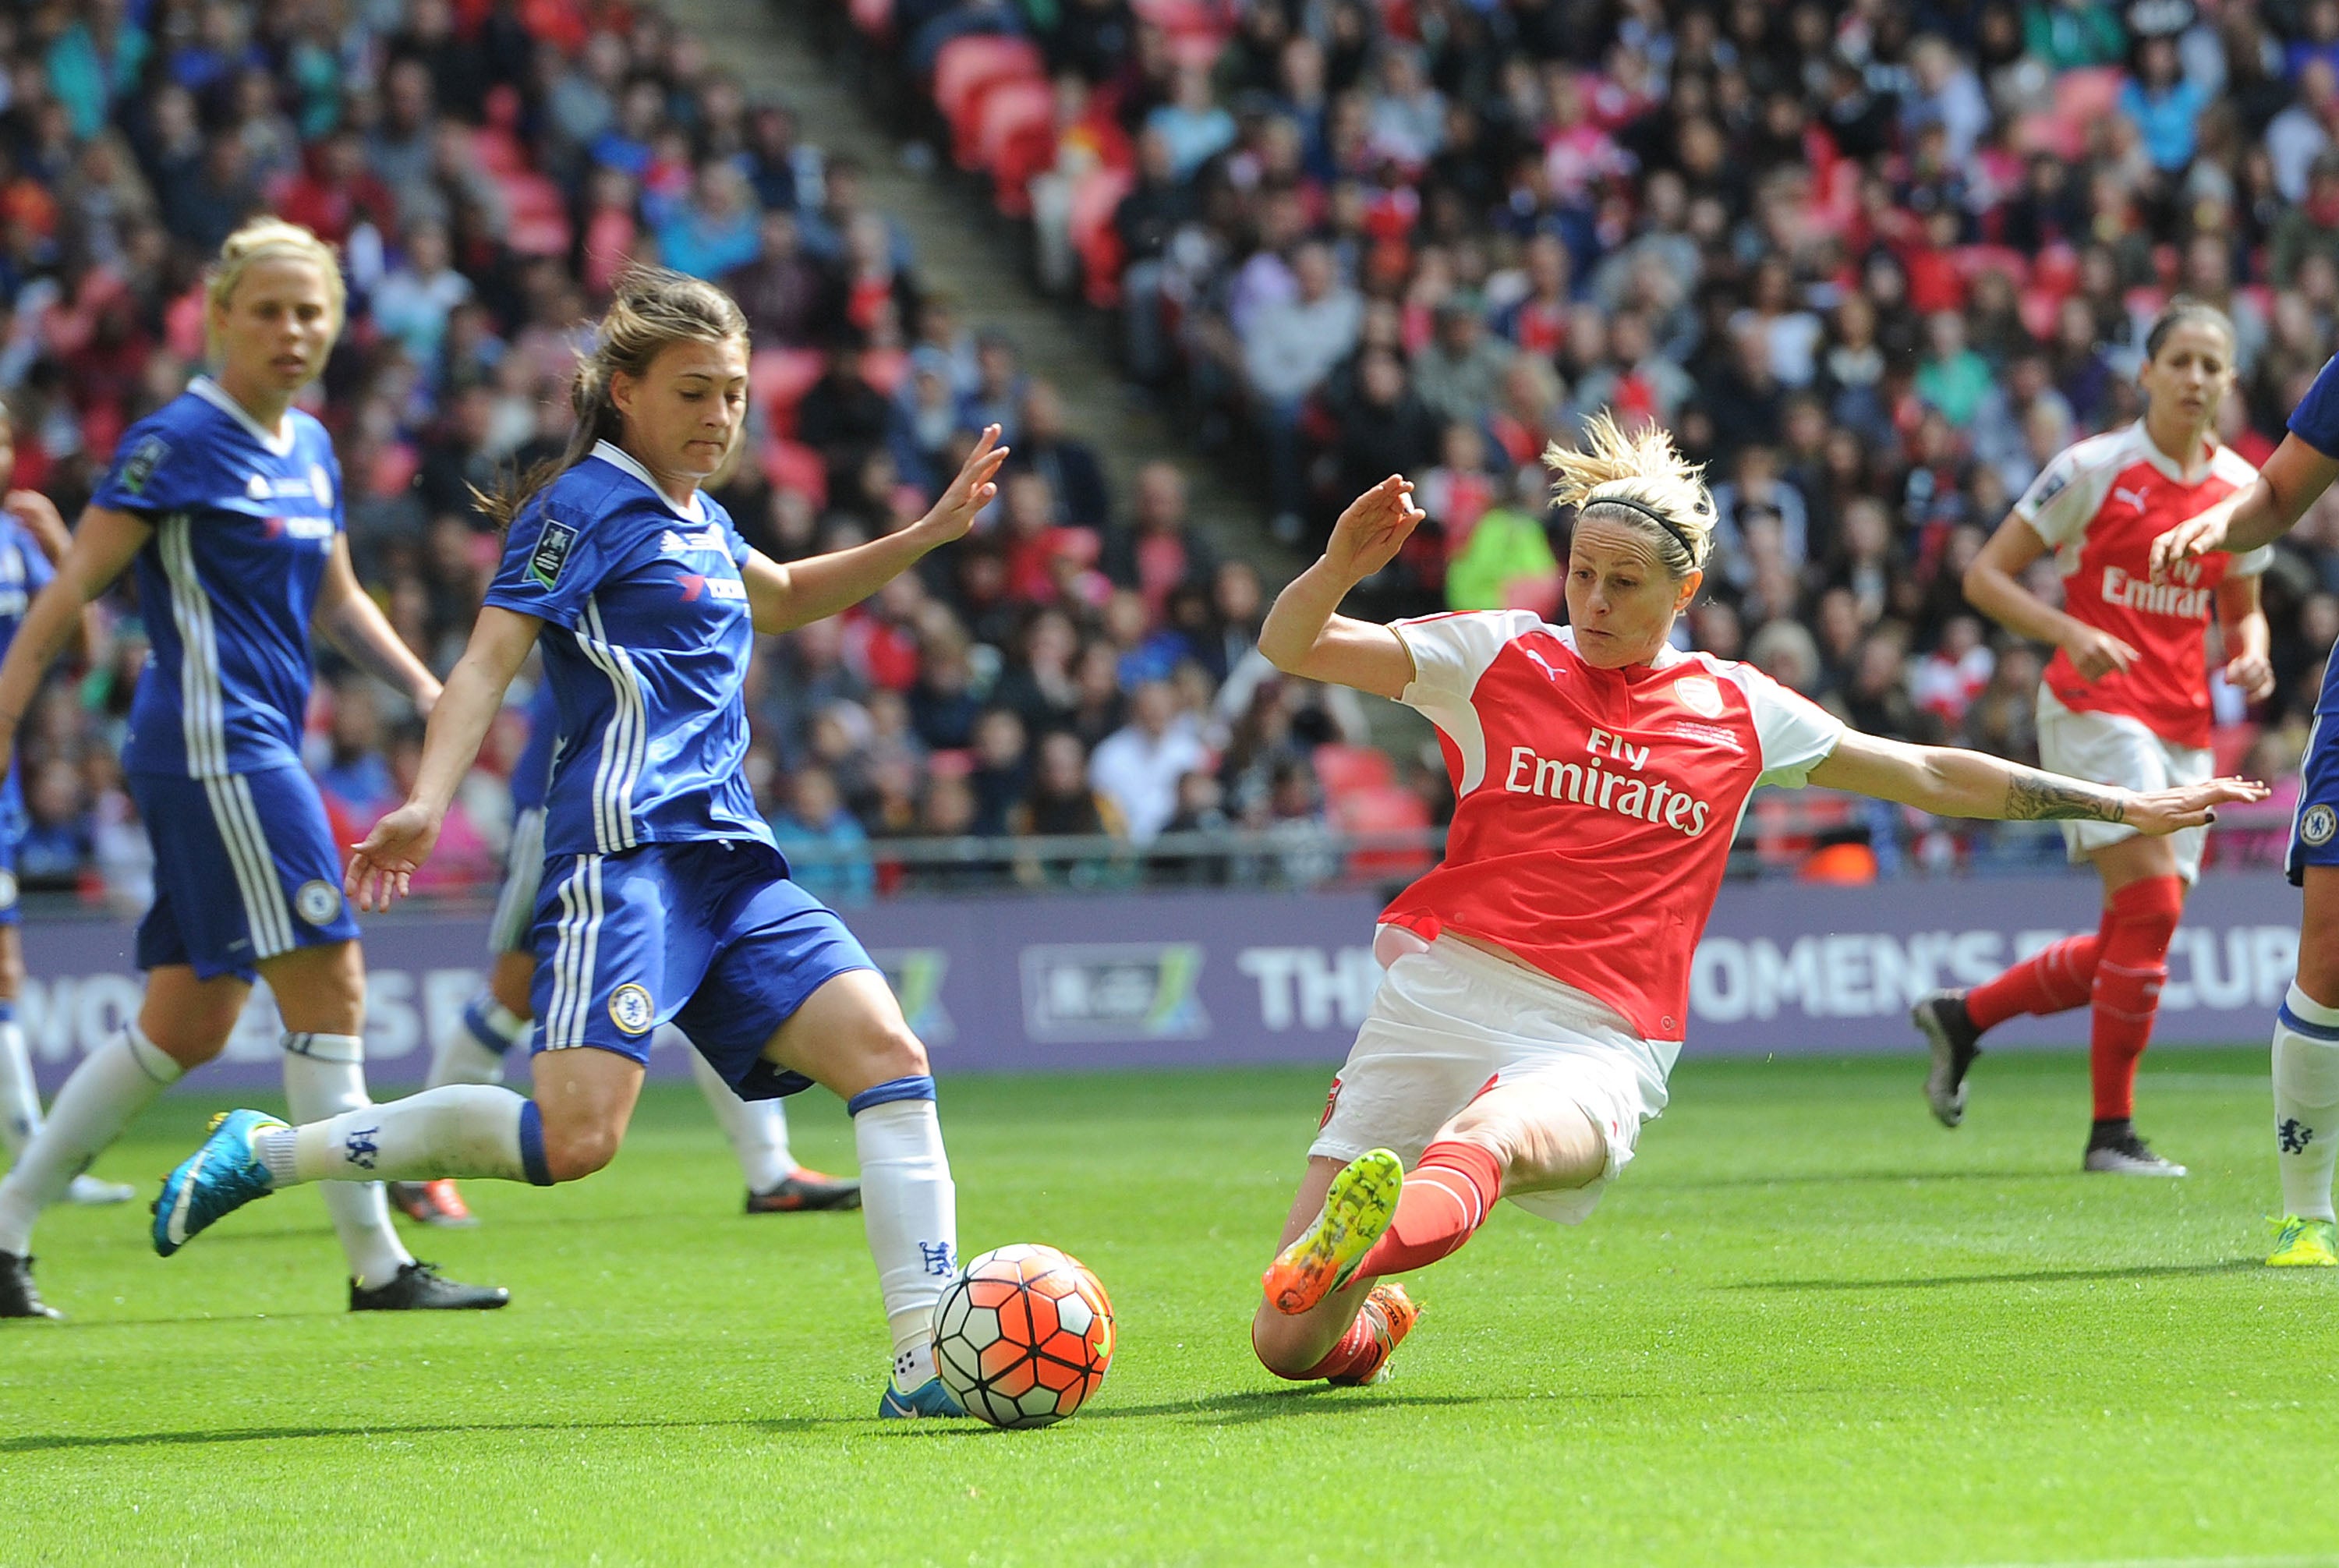 Kelly Smith in action for Arsenal in the 2016 FA Cup final against Chelsea